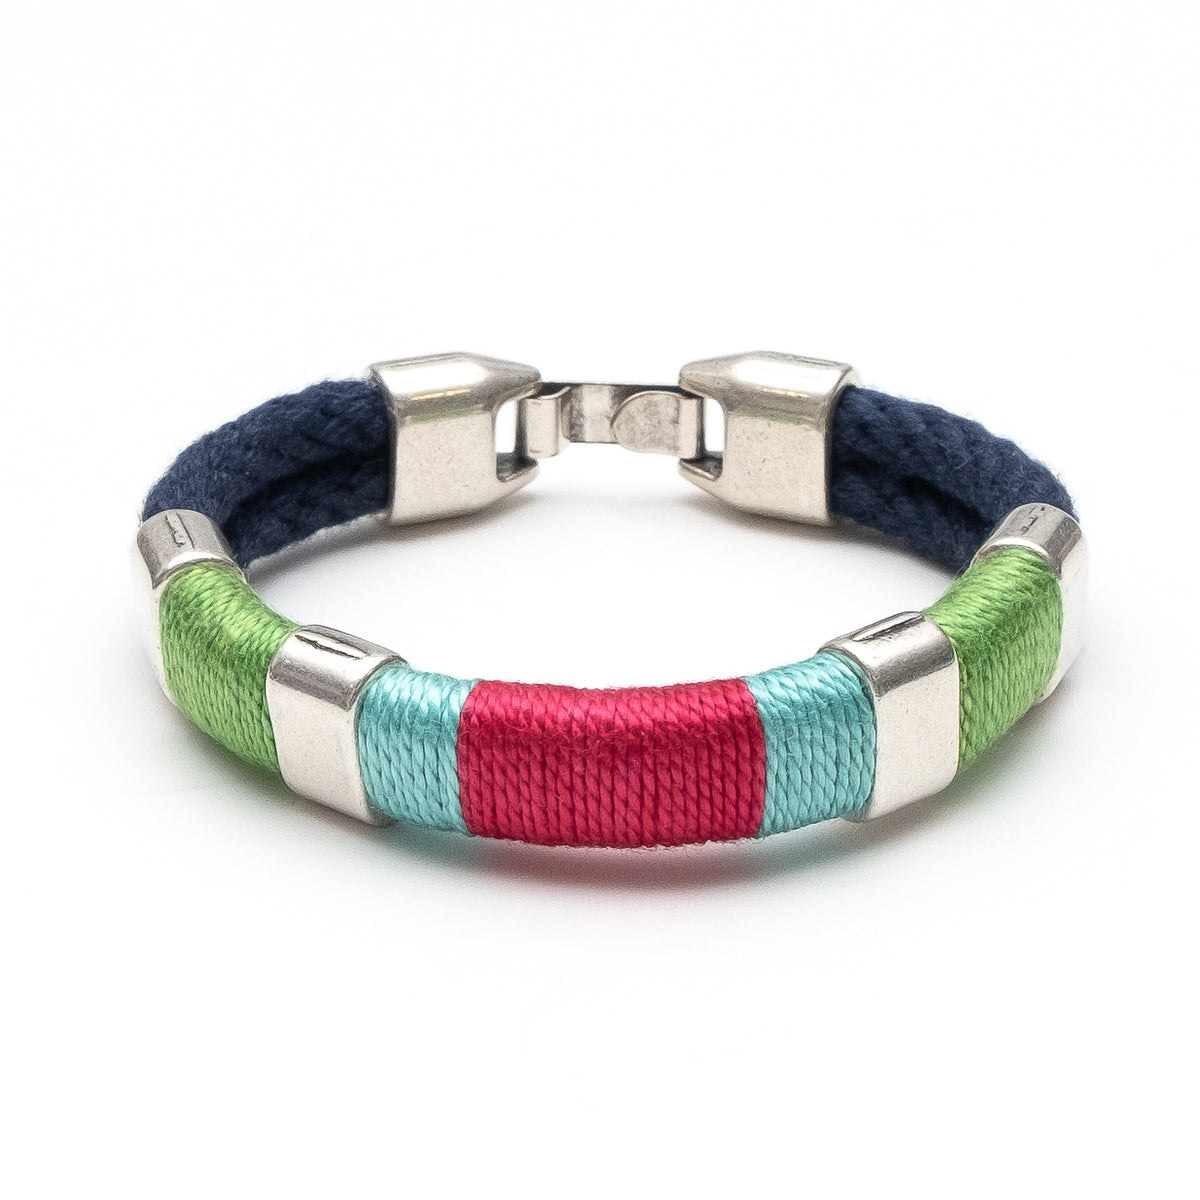 Newbury - Navy/Lime/Turquoise/Pink/Silver